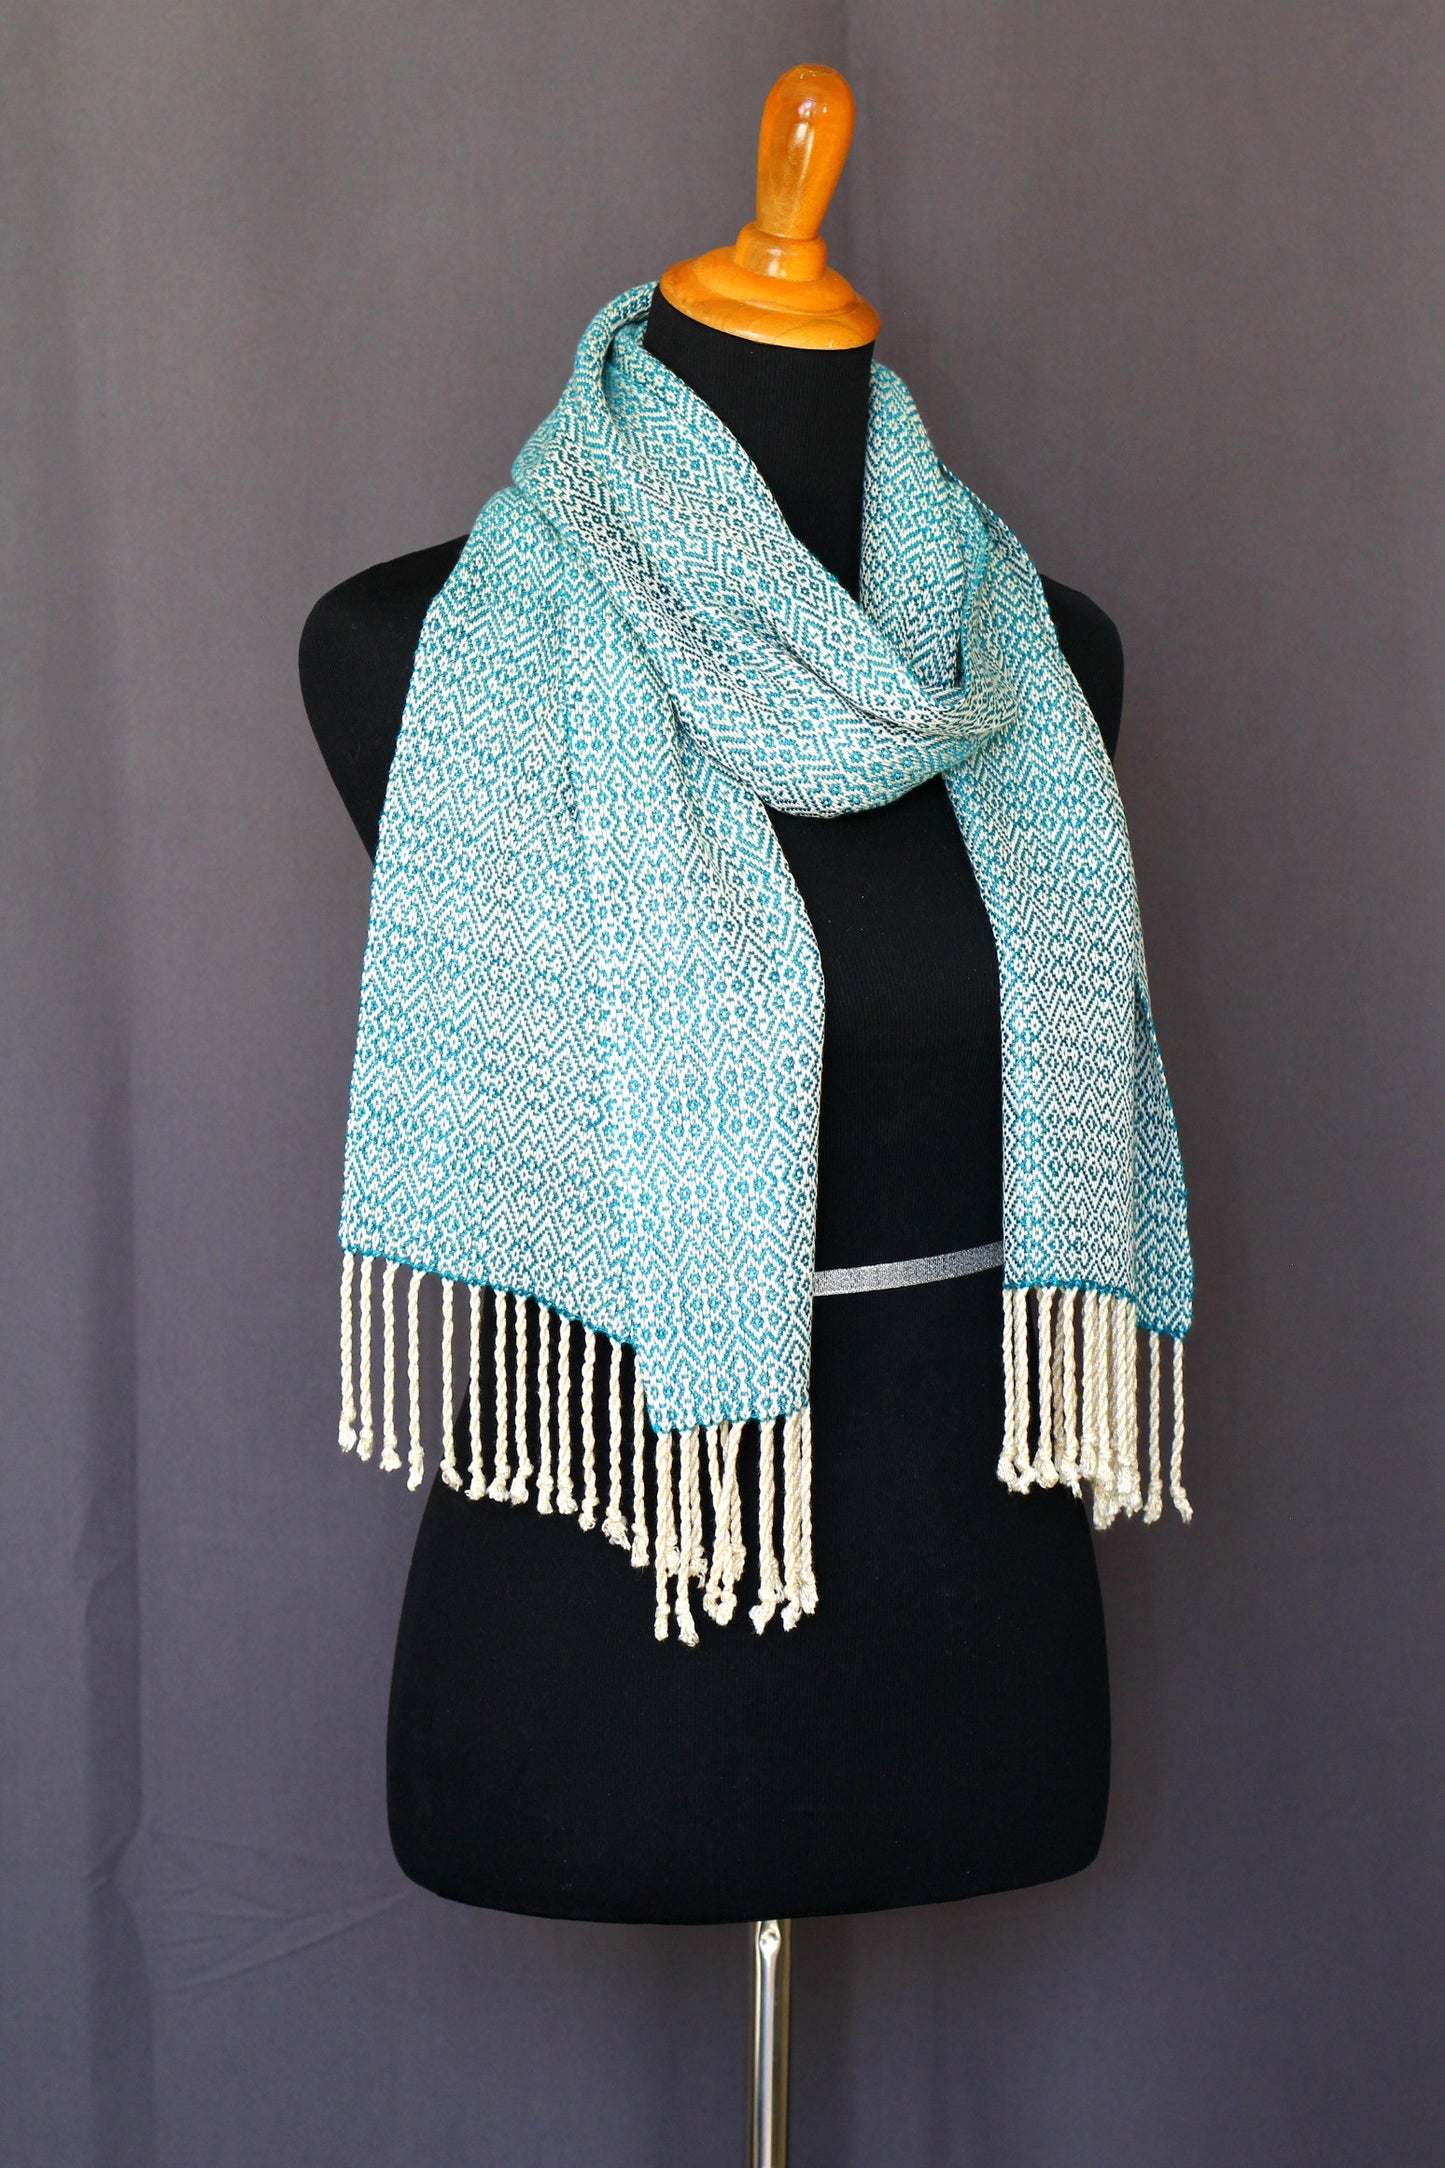 Woven scarf in teal and cream colors, bamboo scarf, summer scarf, long scarf with fringe